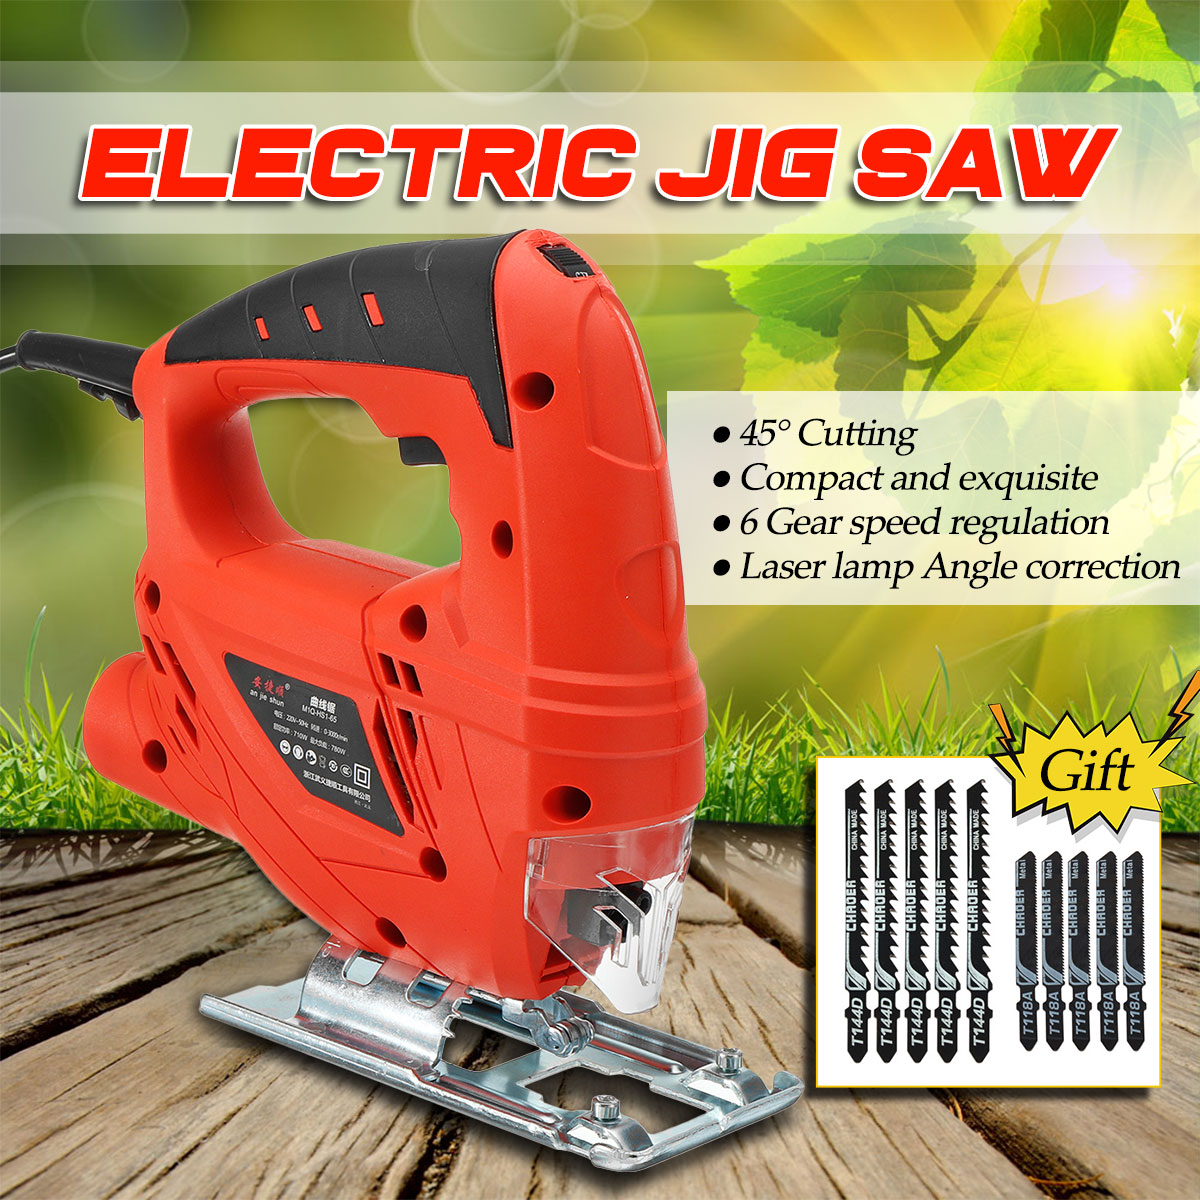 Electric-Jig-Saw-Variable-Speed-Power-Tools-Metal-Wood-Cutting-with-10-Saw-Blade-1541187-2